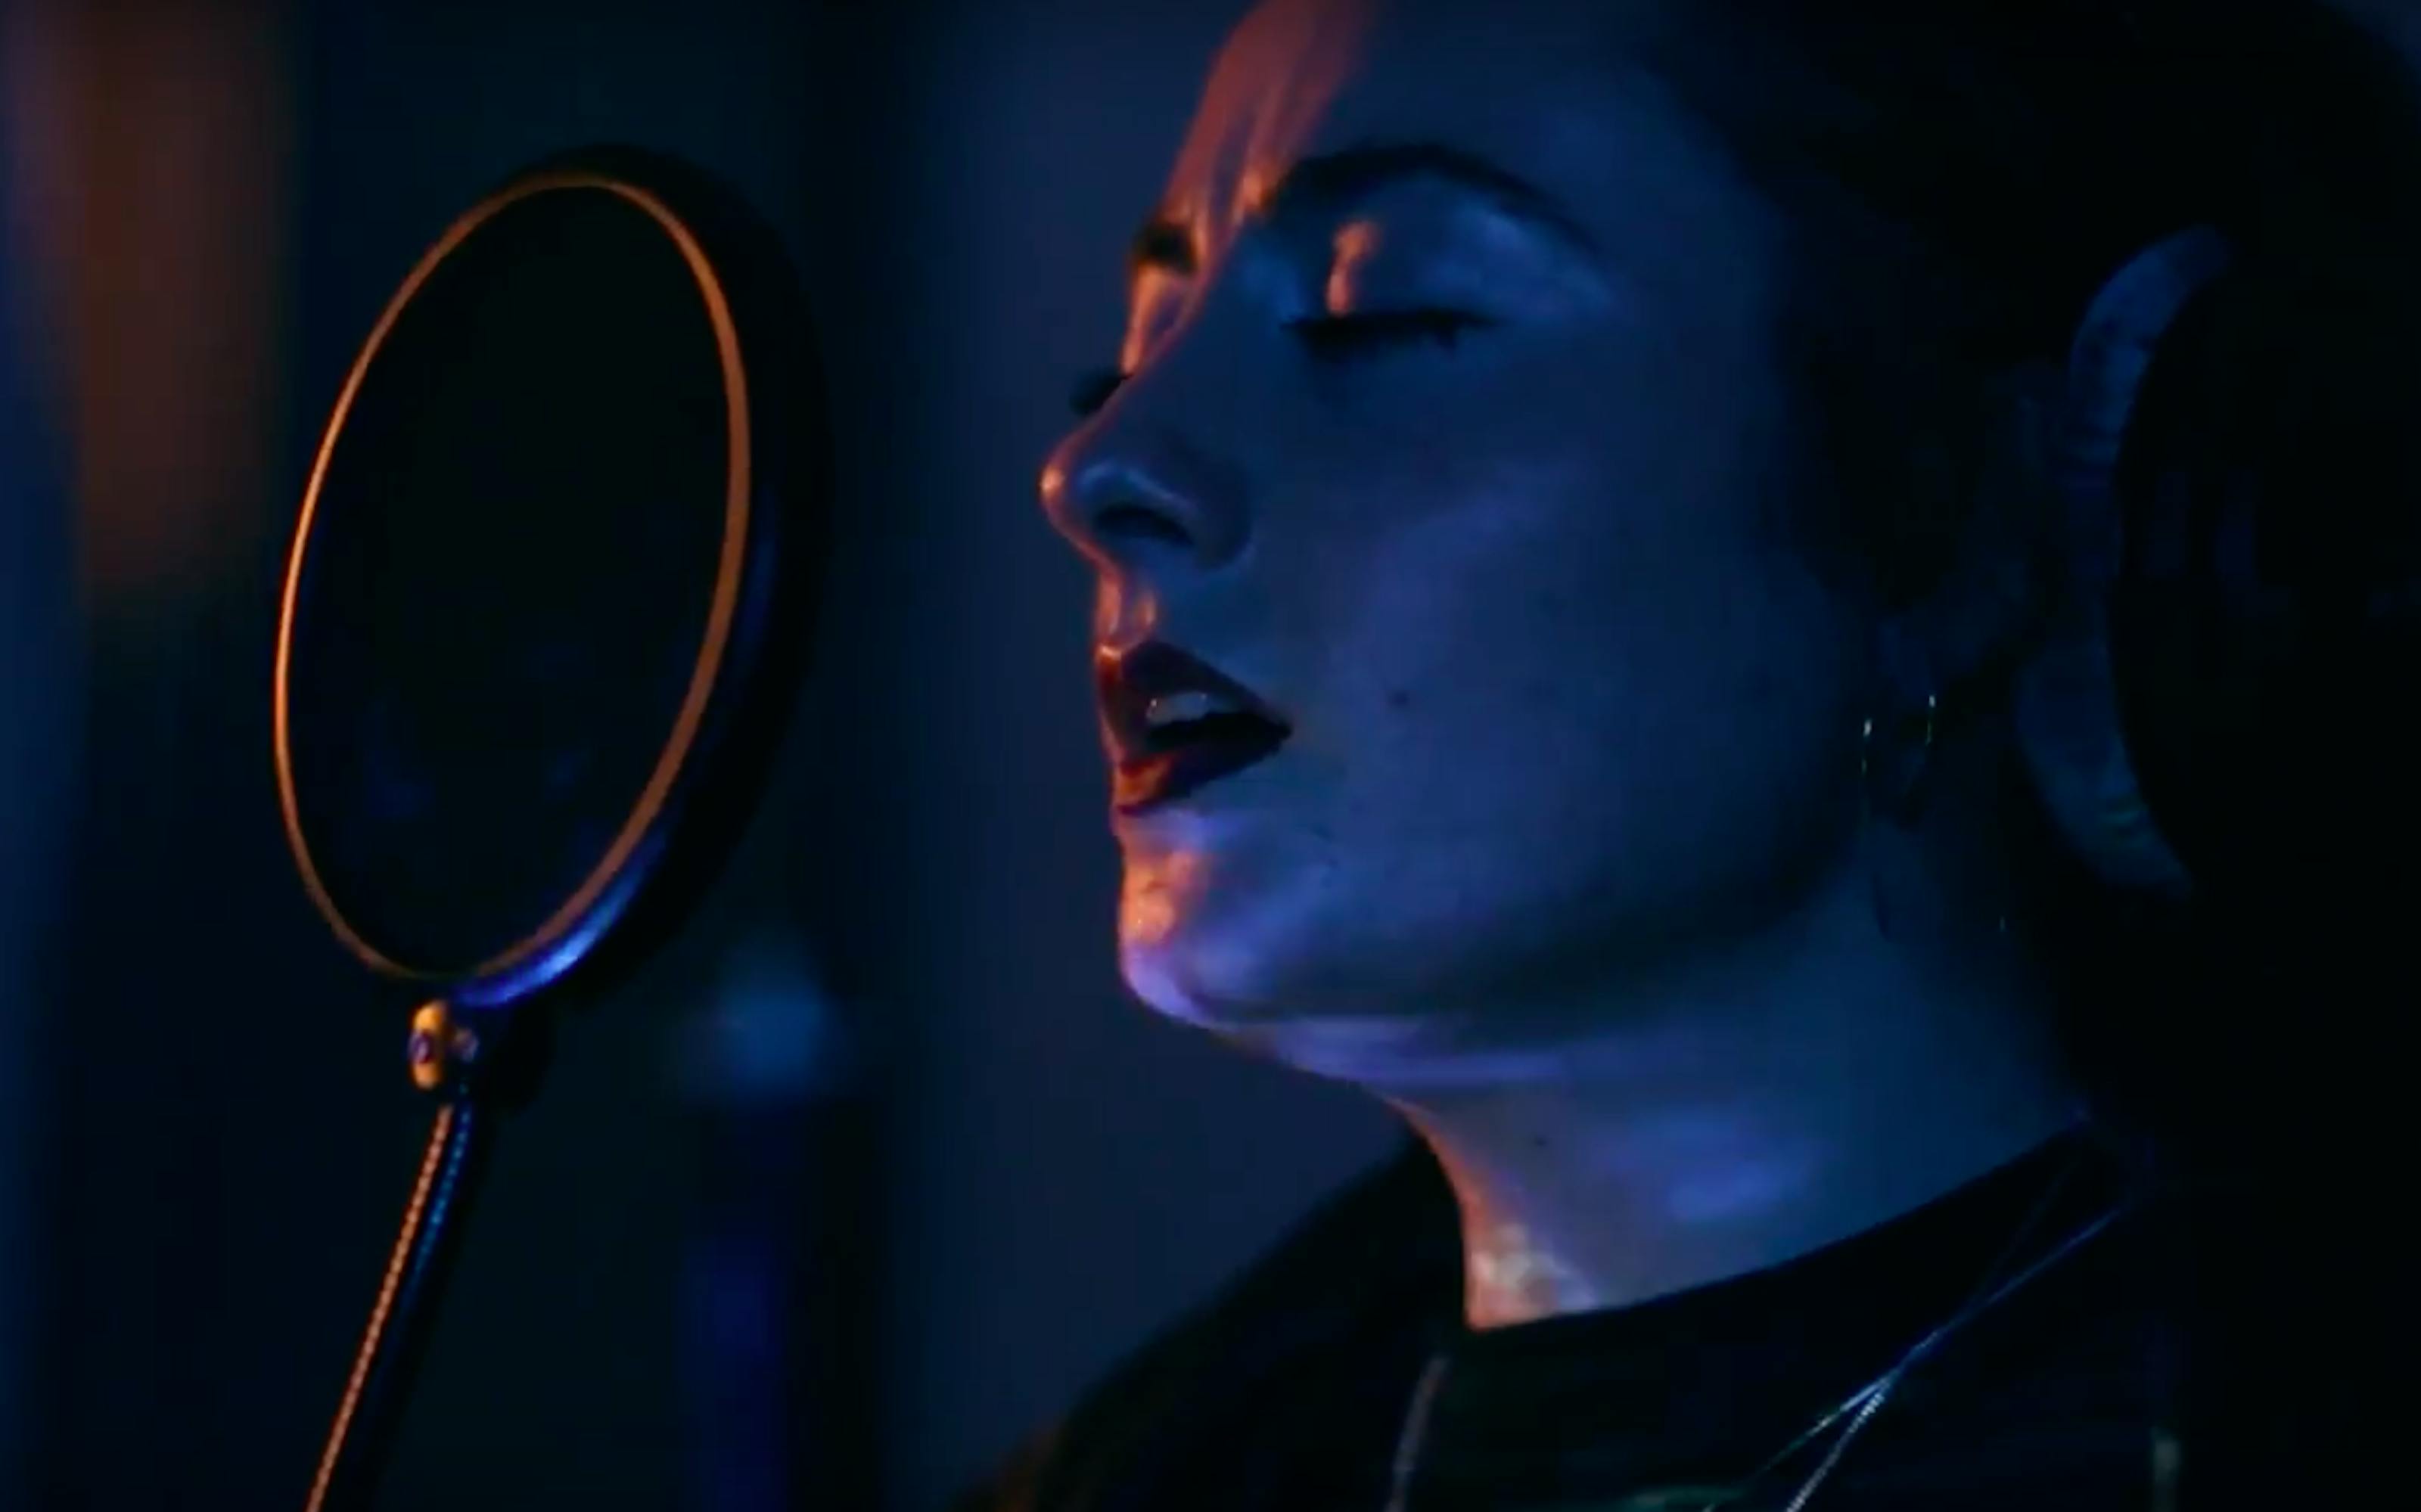 Electronic Music Production & Performance student LAMIA performs a live Studio Session at Catalyst Berlin